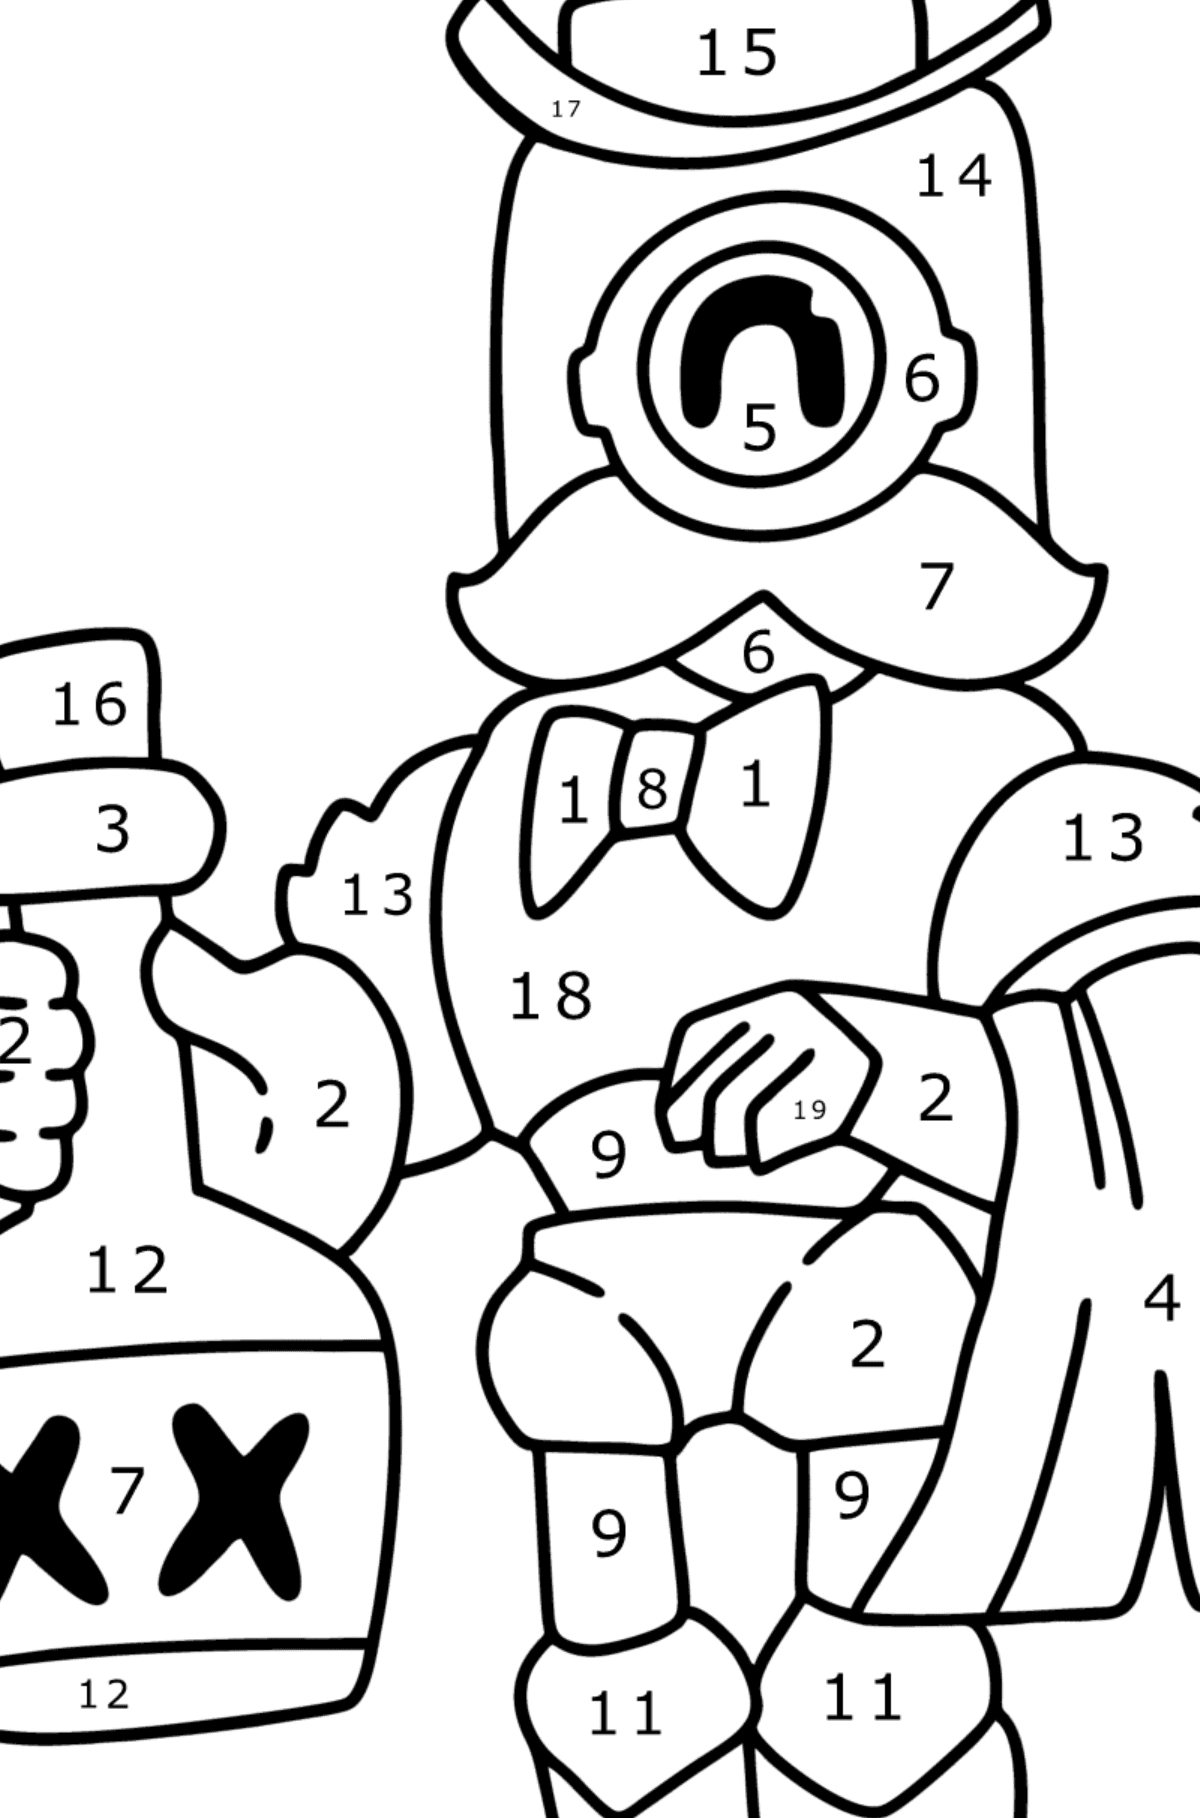 Brawl Stars Barley colouring page - Coloring by Numbers for Kids